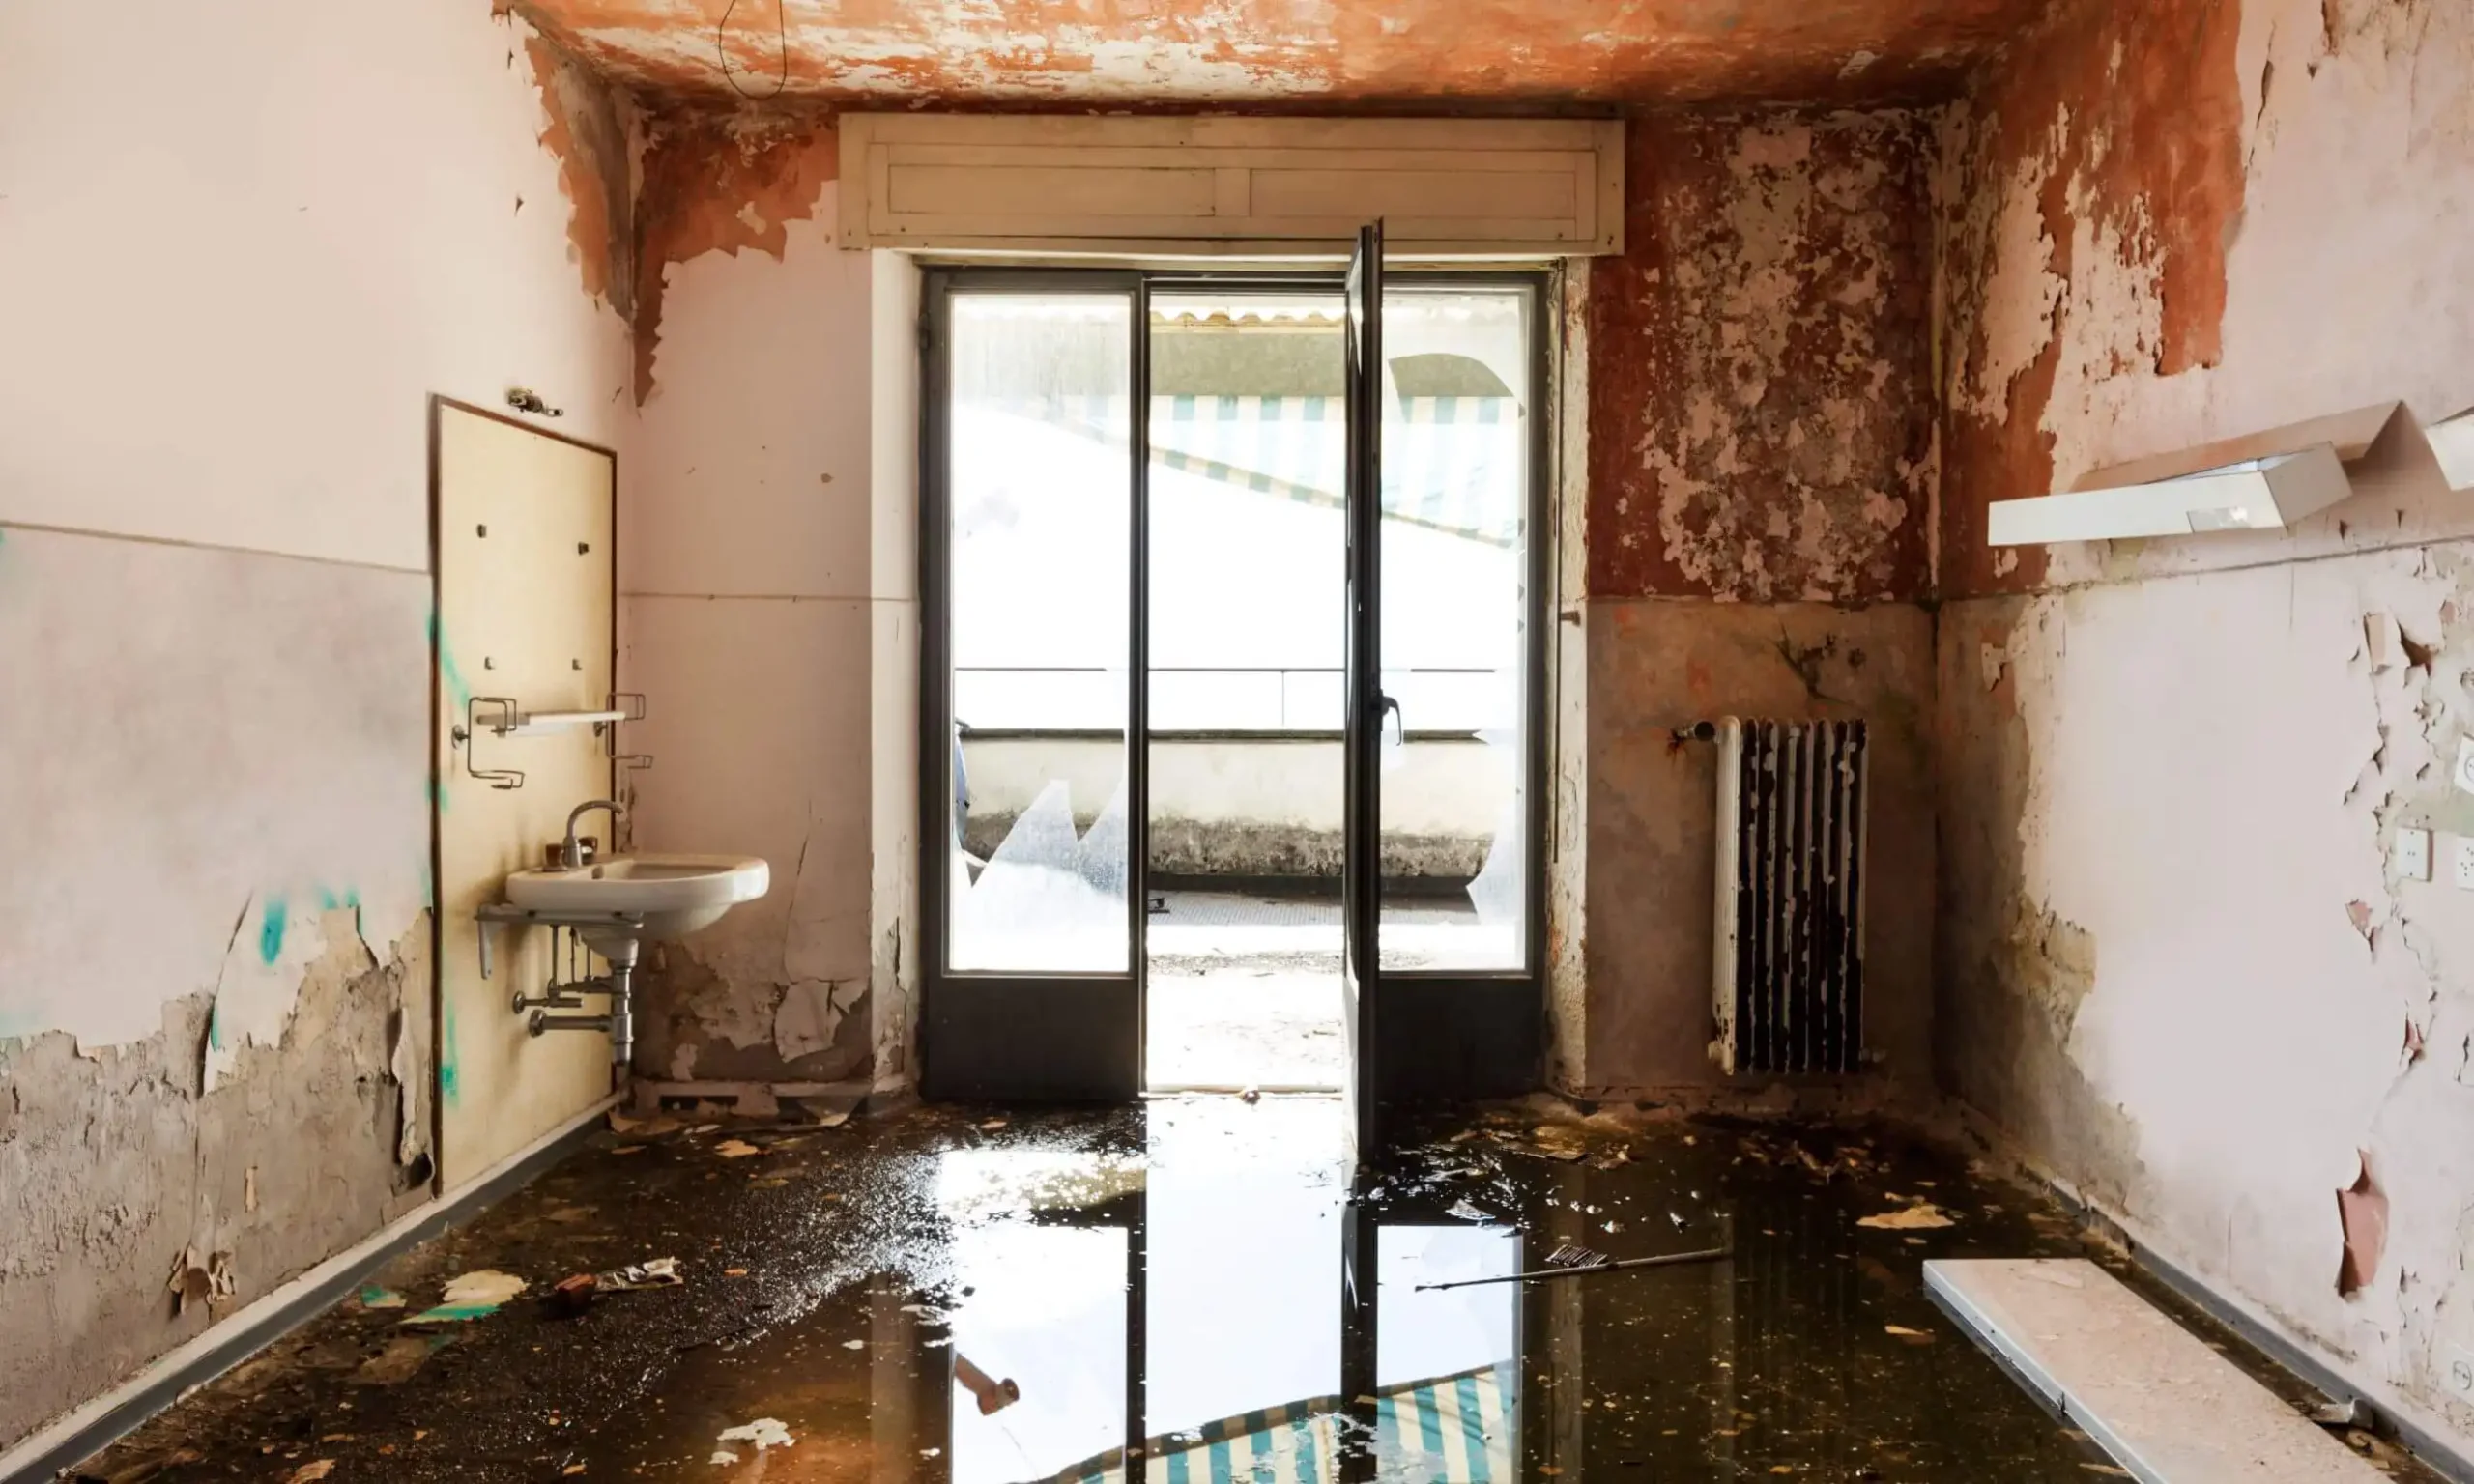 An empty room that suffered flood damage in the aftermath of a hurricane.